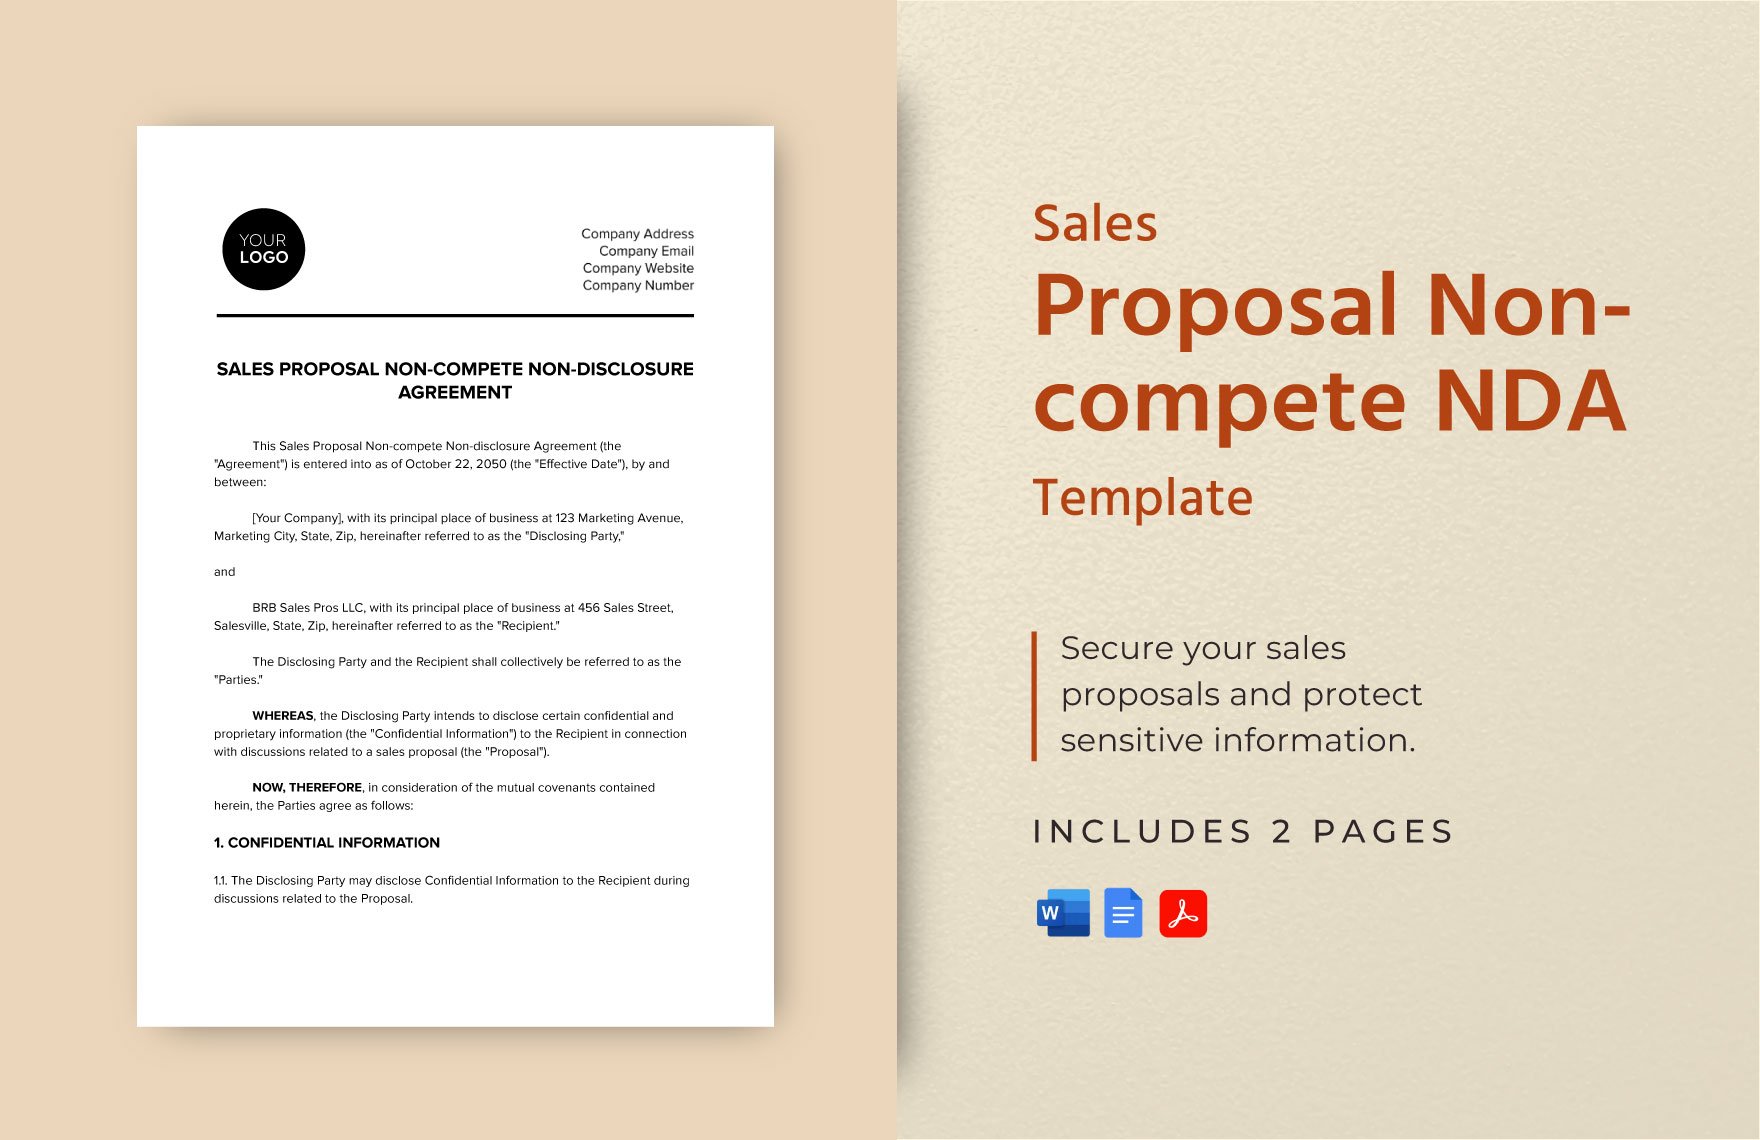 Sales Proposal Non-compete NDA Template in Word, Google Docs, PDF